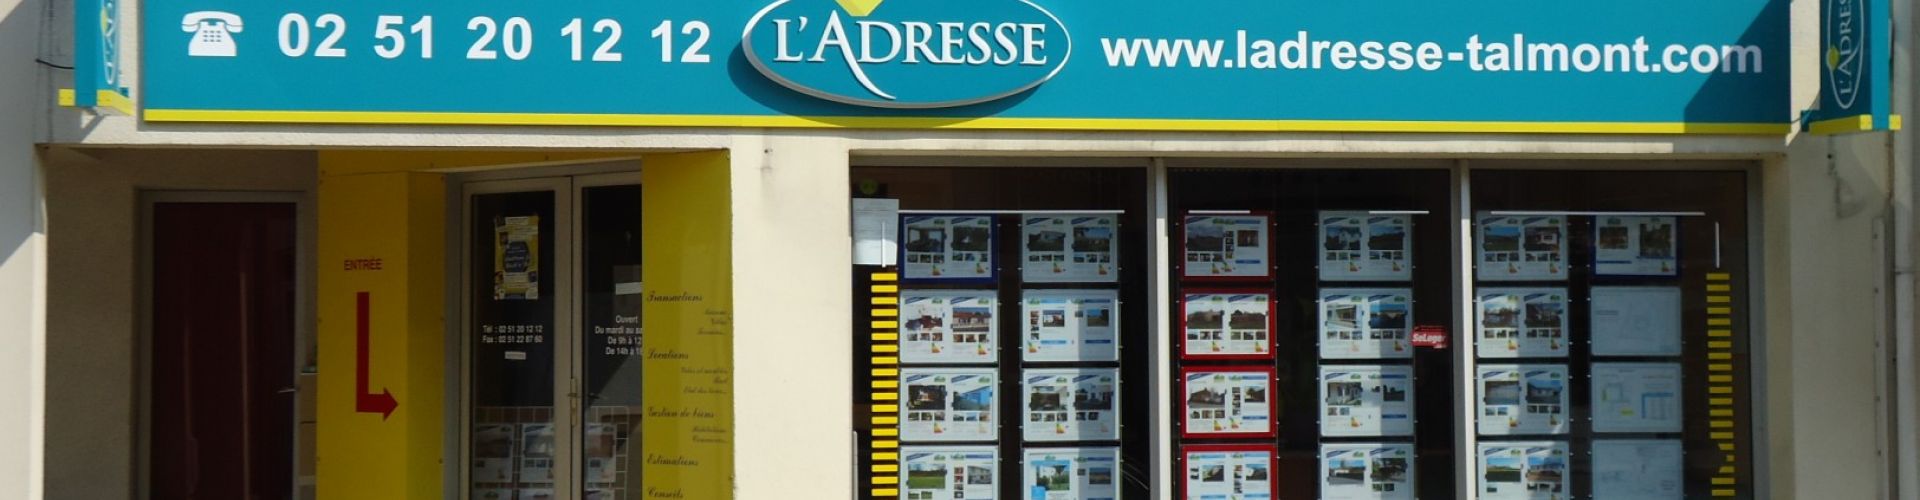 ladresse immobilier